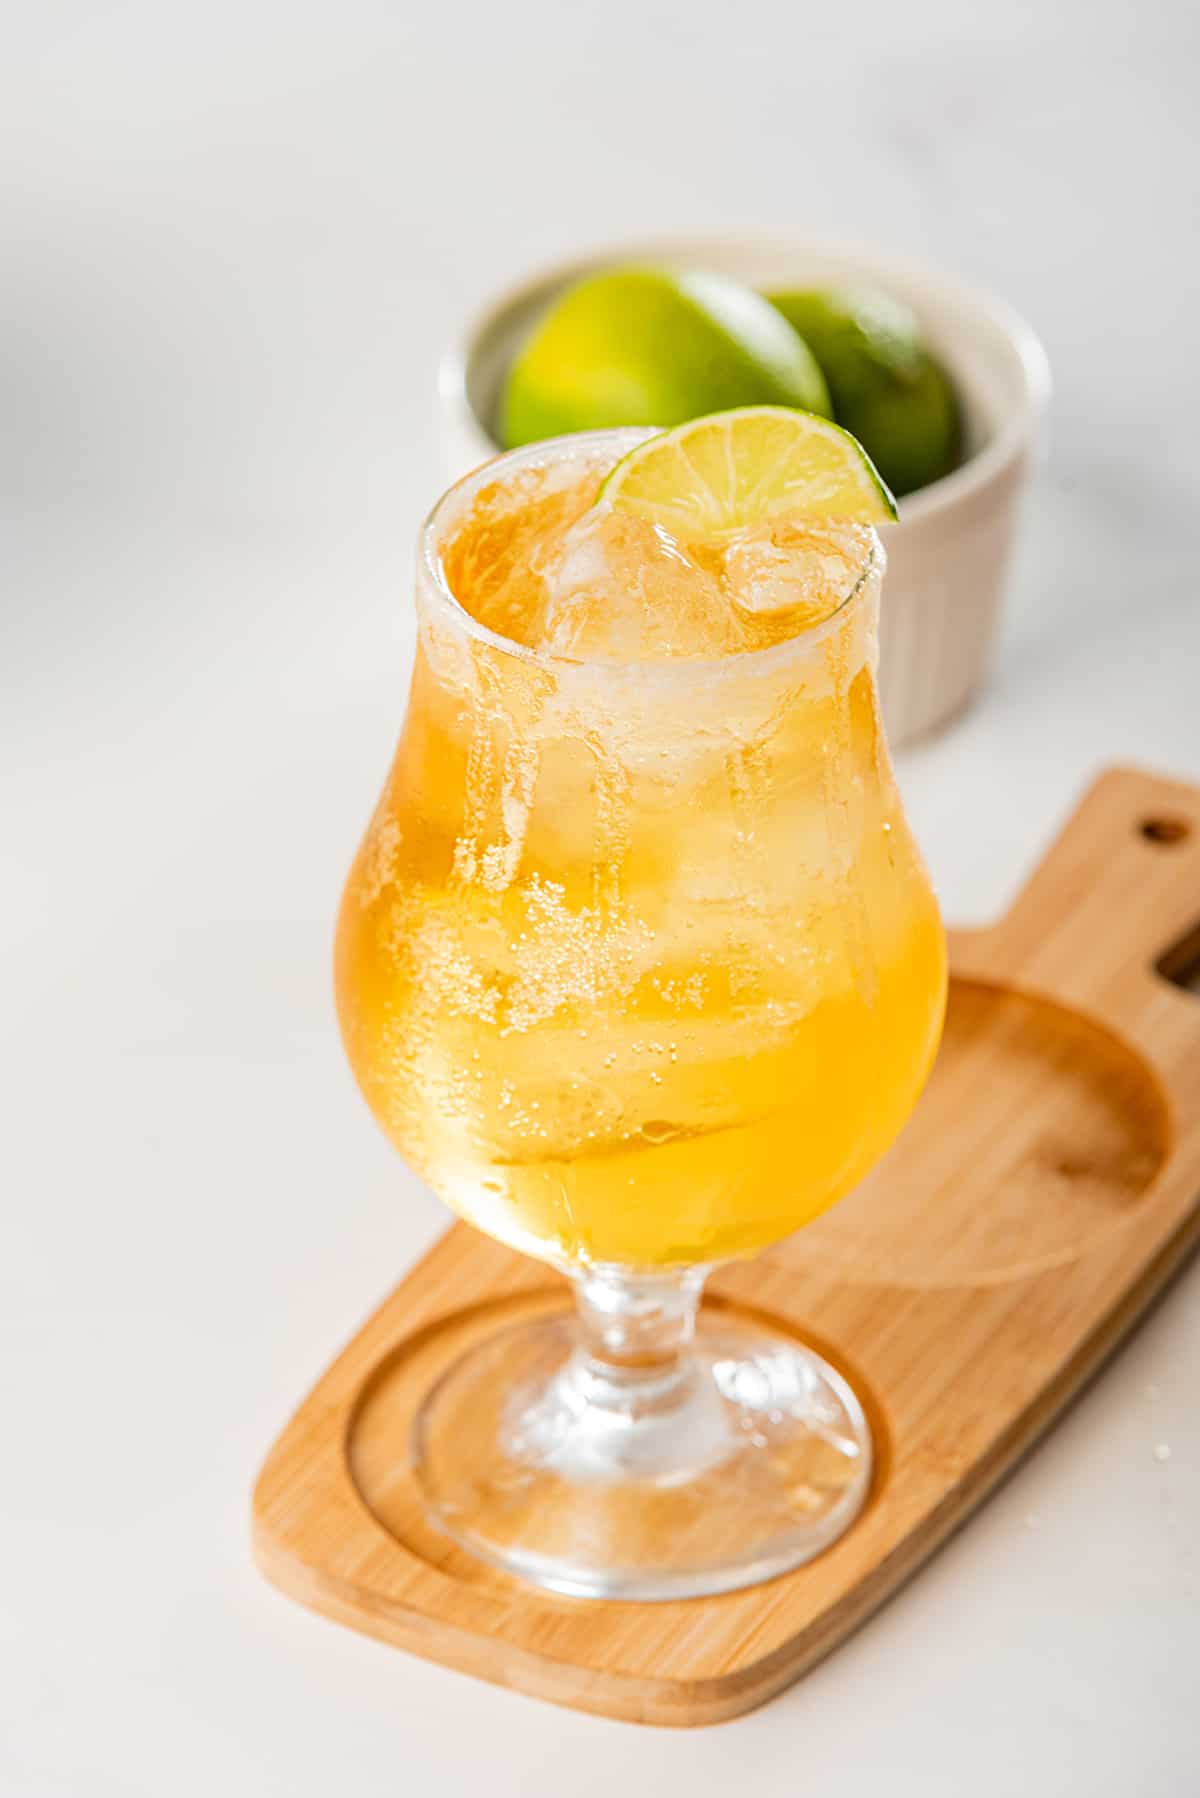 A beer cocktail served in a glass with lime wedges.